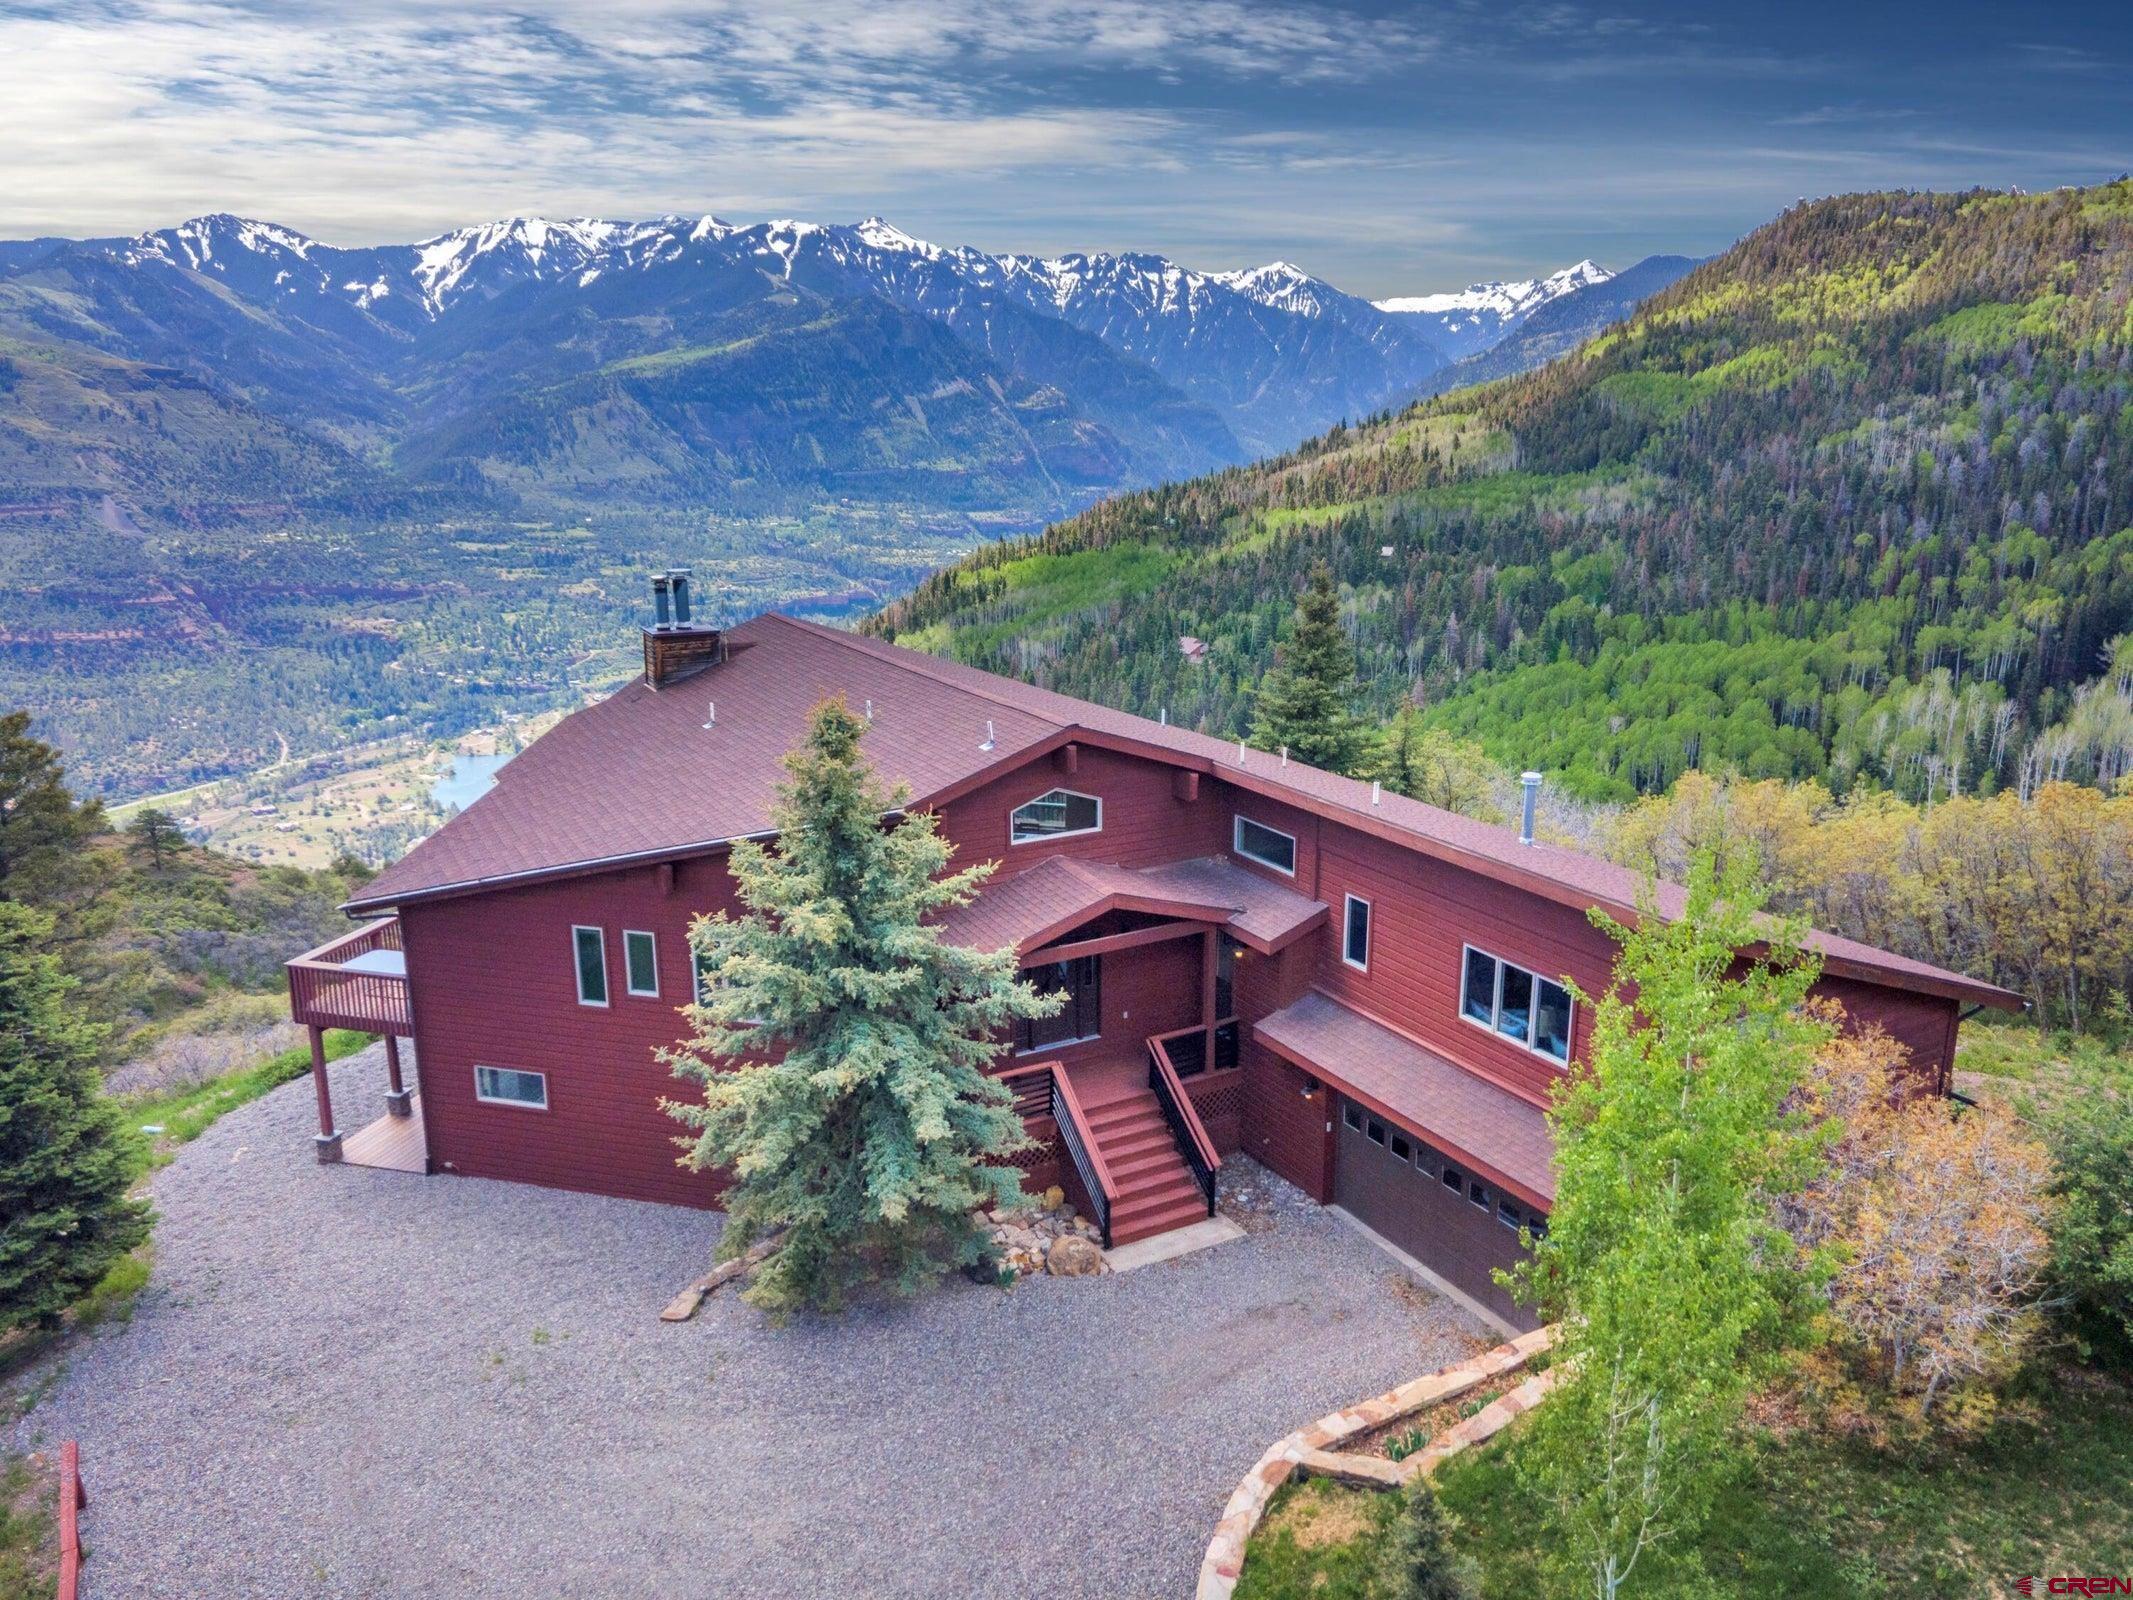 Views like you've never seen before! This 4-bedroom (plus flex) home is perched at the top of Elk Ridge Trail, highlighting the stunning 180-degree vistas that span from Grand Mesa to Mt. Abrams to Mount Sneffels. The upper-level living spaces are framed with a panoramic Trex deck, while the lower-level bedrooms have walk-outs to a lower deck and a newly installed patio. This meticulously-maintained home includes two 2-car garages and is situated on 35 acres in a gated community with year-round access, close proximity to recreation on Forest Service land, and a short drive to Ouray & Ridgway. Conveniently located near every outdoor activity imaginable, two hot spring resorts, & the Telluride & Silverton Ski Resorts, 1600 Elk Ridge trail is the ultimate Colorado mountain retreat.